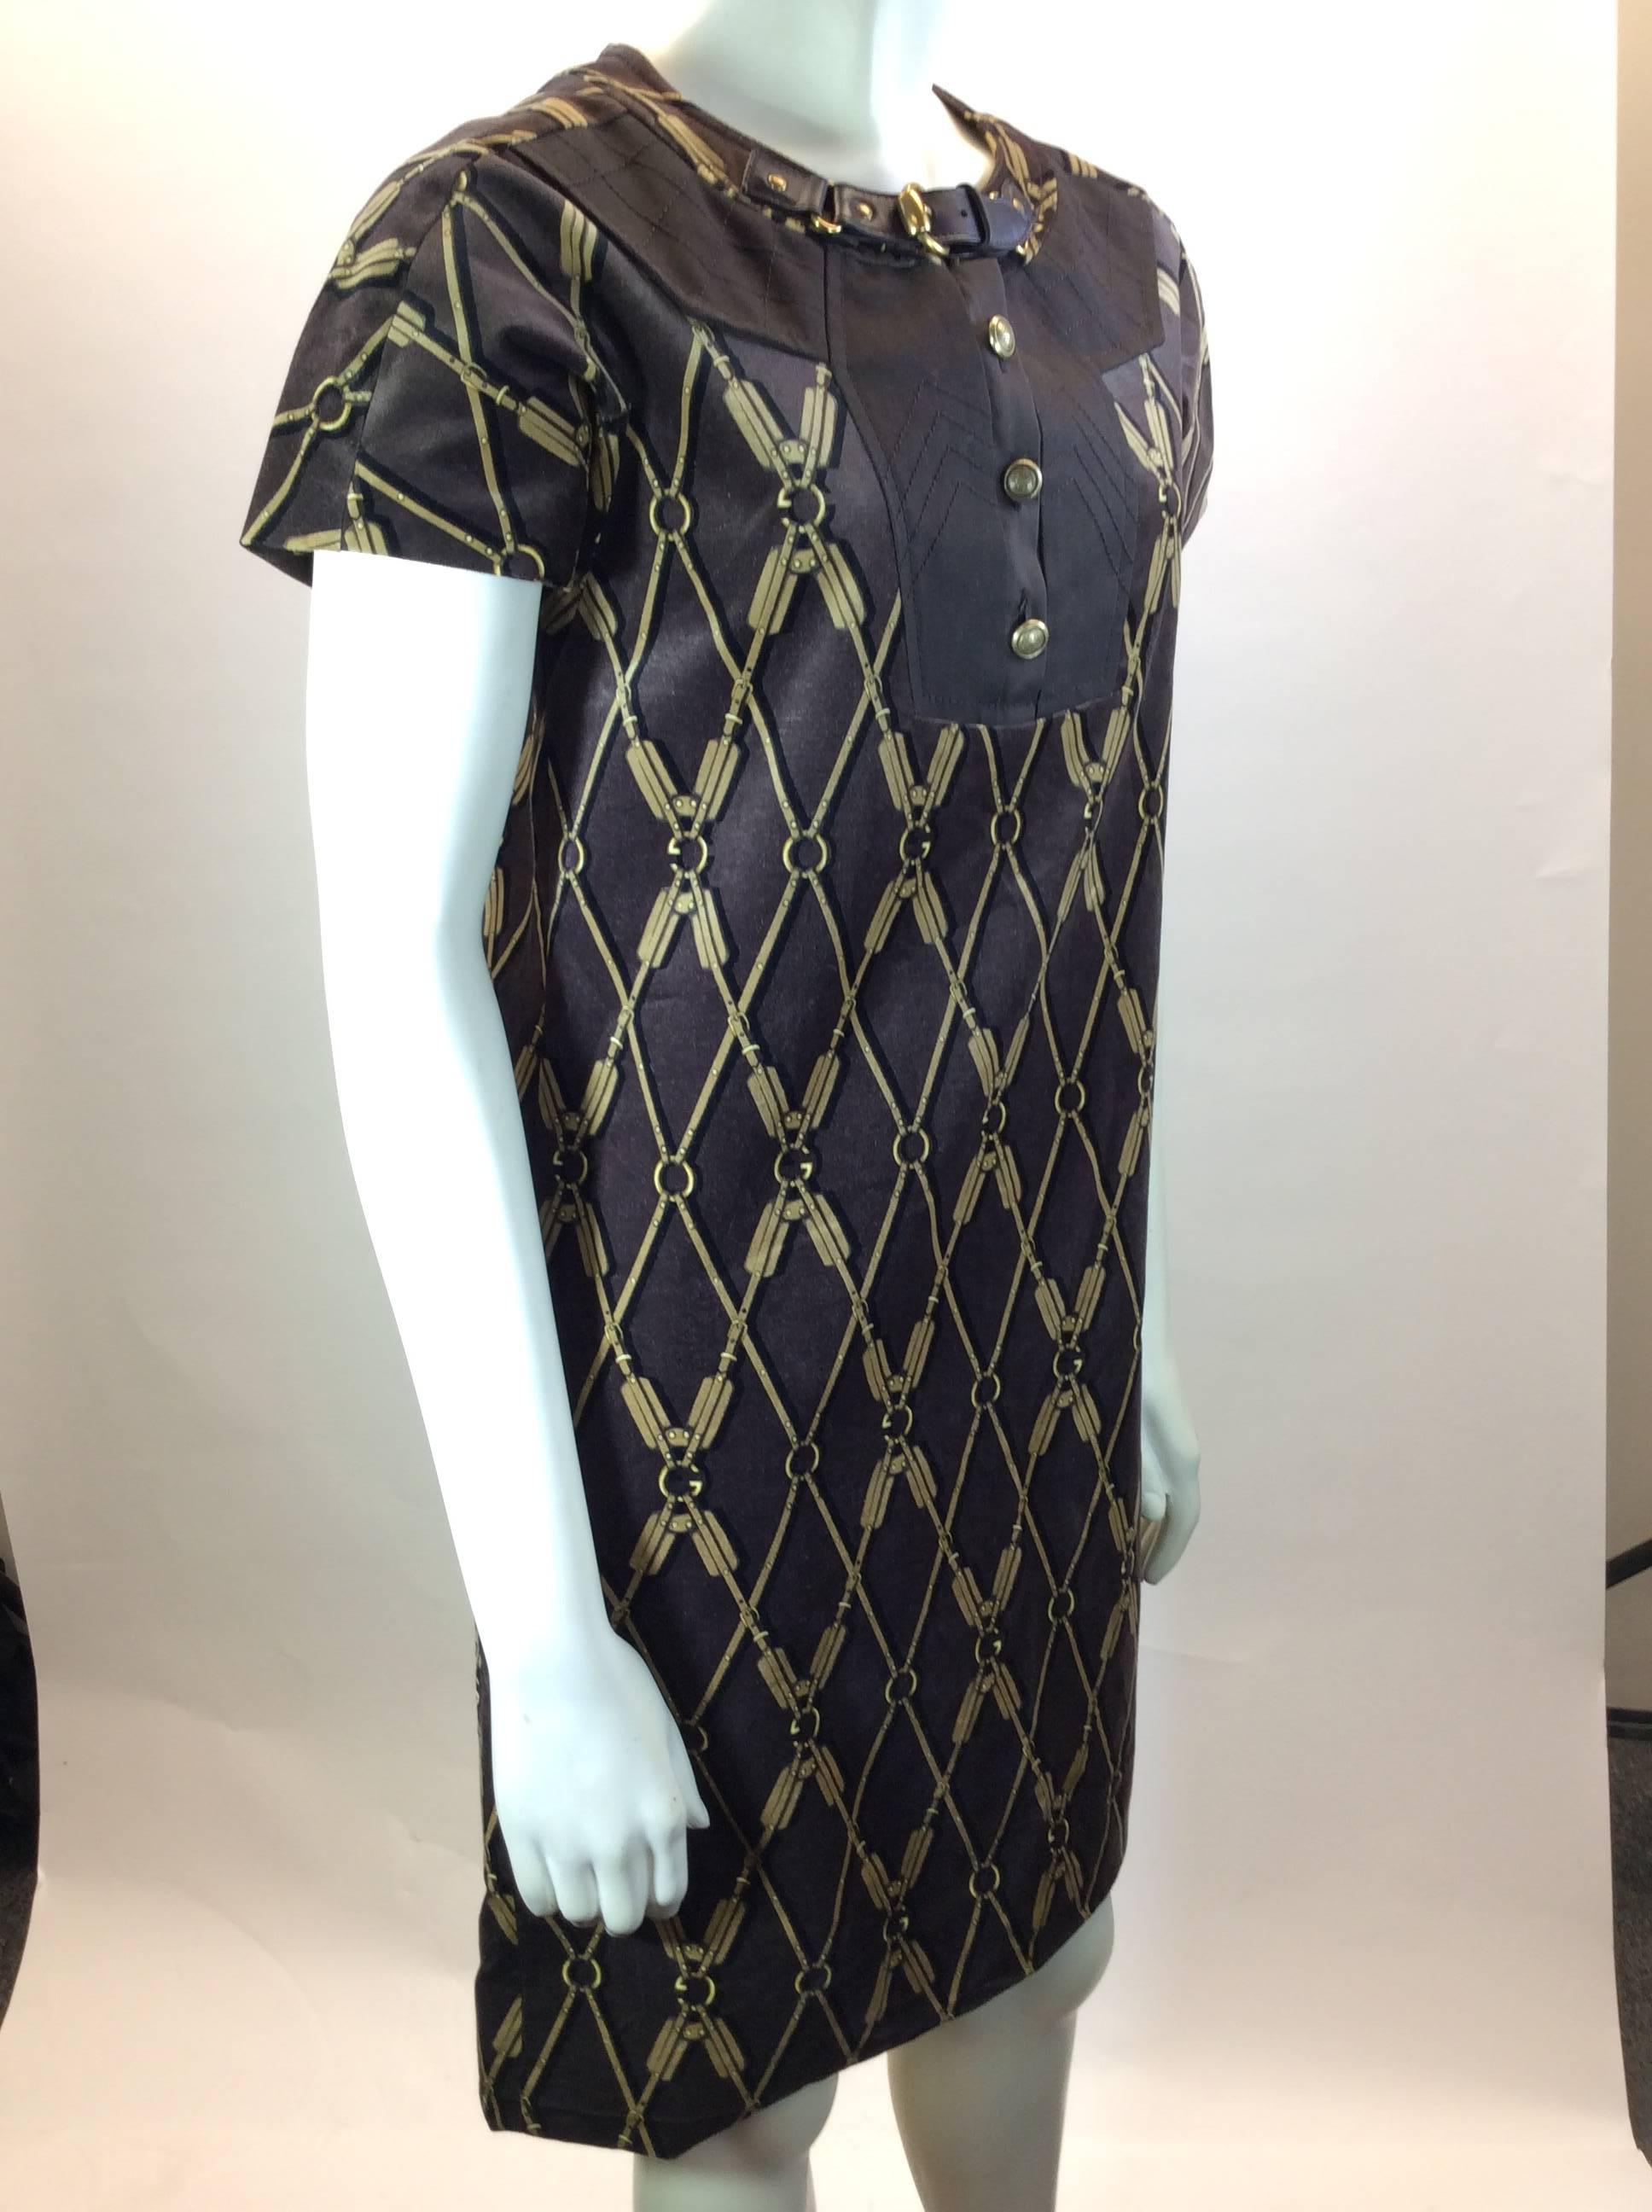 Gucci Printed Velvet Dress
Gold Chain Design 
Buttons and Buckle on front for Closure
Gold Hardware 
Short Sleeve
No sizing, Refer to Measurements 